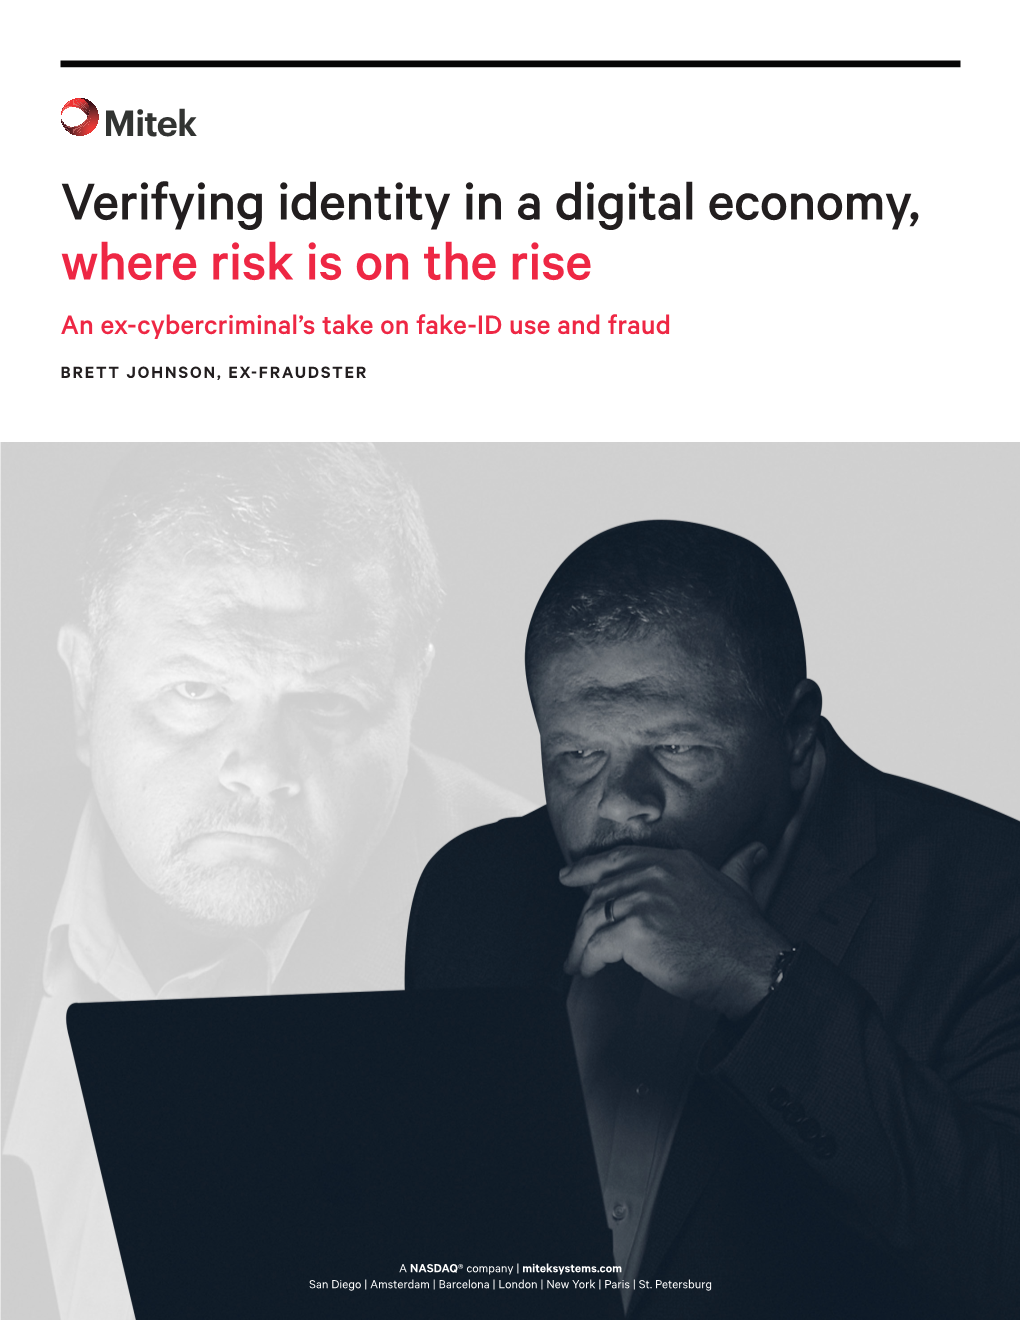 Verifying Identity in a Digital Economy, Where Risk Is on the Rise an Ex-Cybercriminal’S Take on Fake-ID Use and Fraud